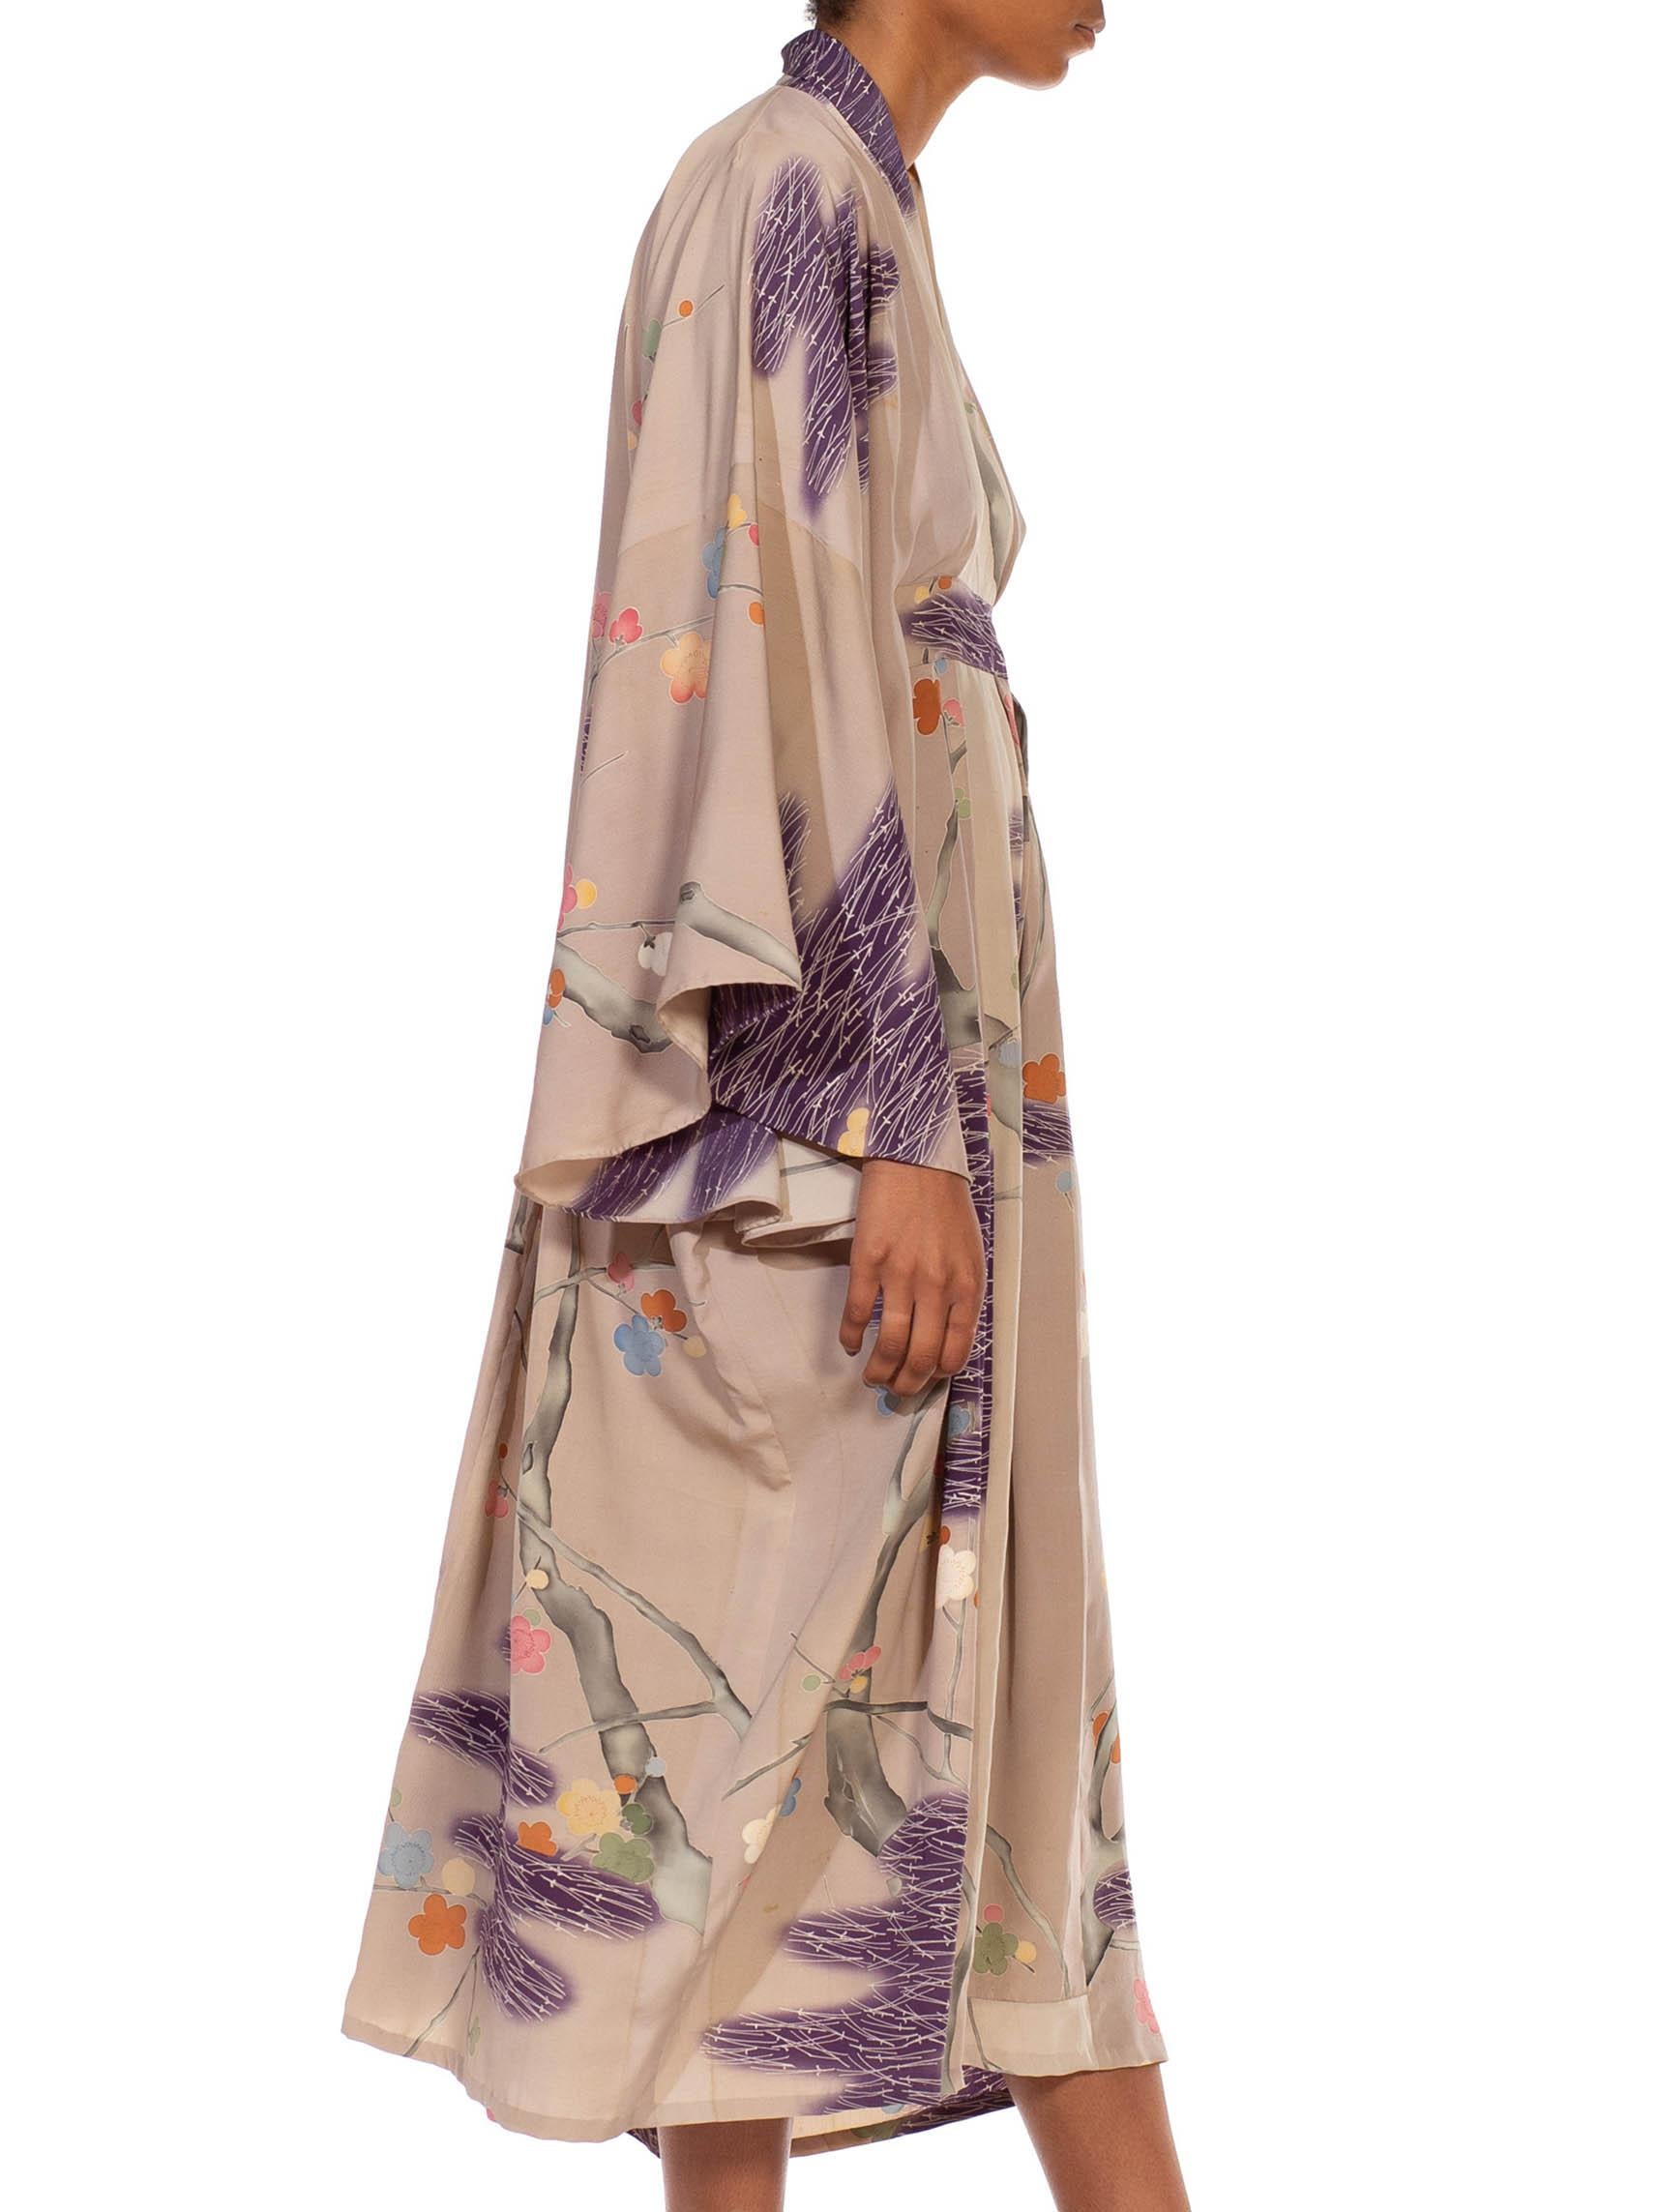 MORPHEW COLLECTION Dusty Purple Silk Hand Painted Kaftan Made From 1950’S Japanese Kimono
MORPHEW COLLECTION is made entirely by hand in our NYC Ateliér of rare antique materials sourced from around the globe. Our sustainable vintage materials